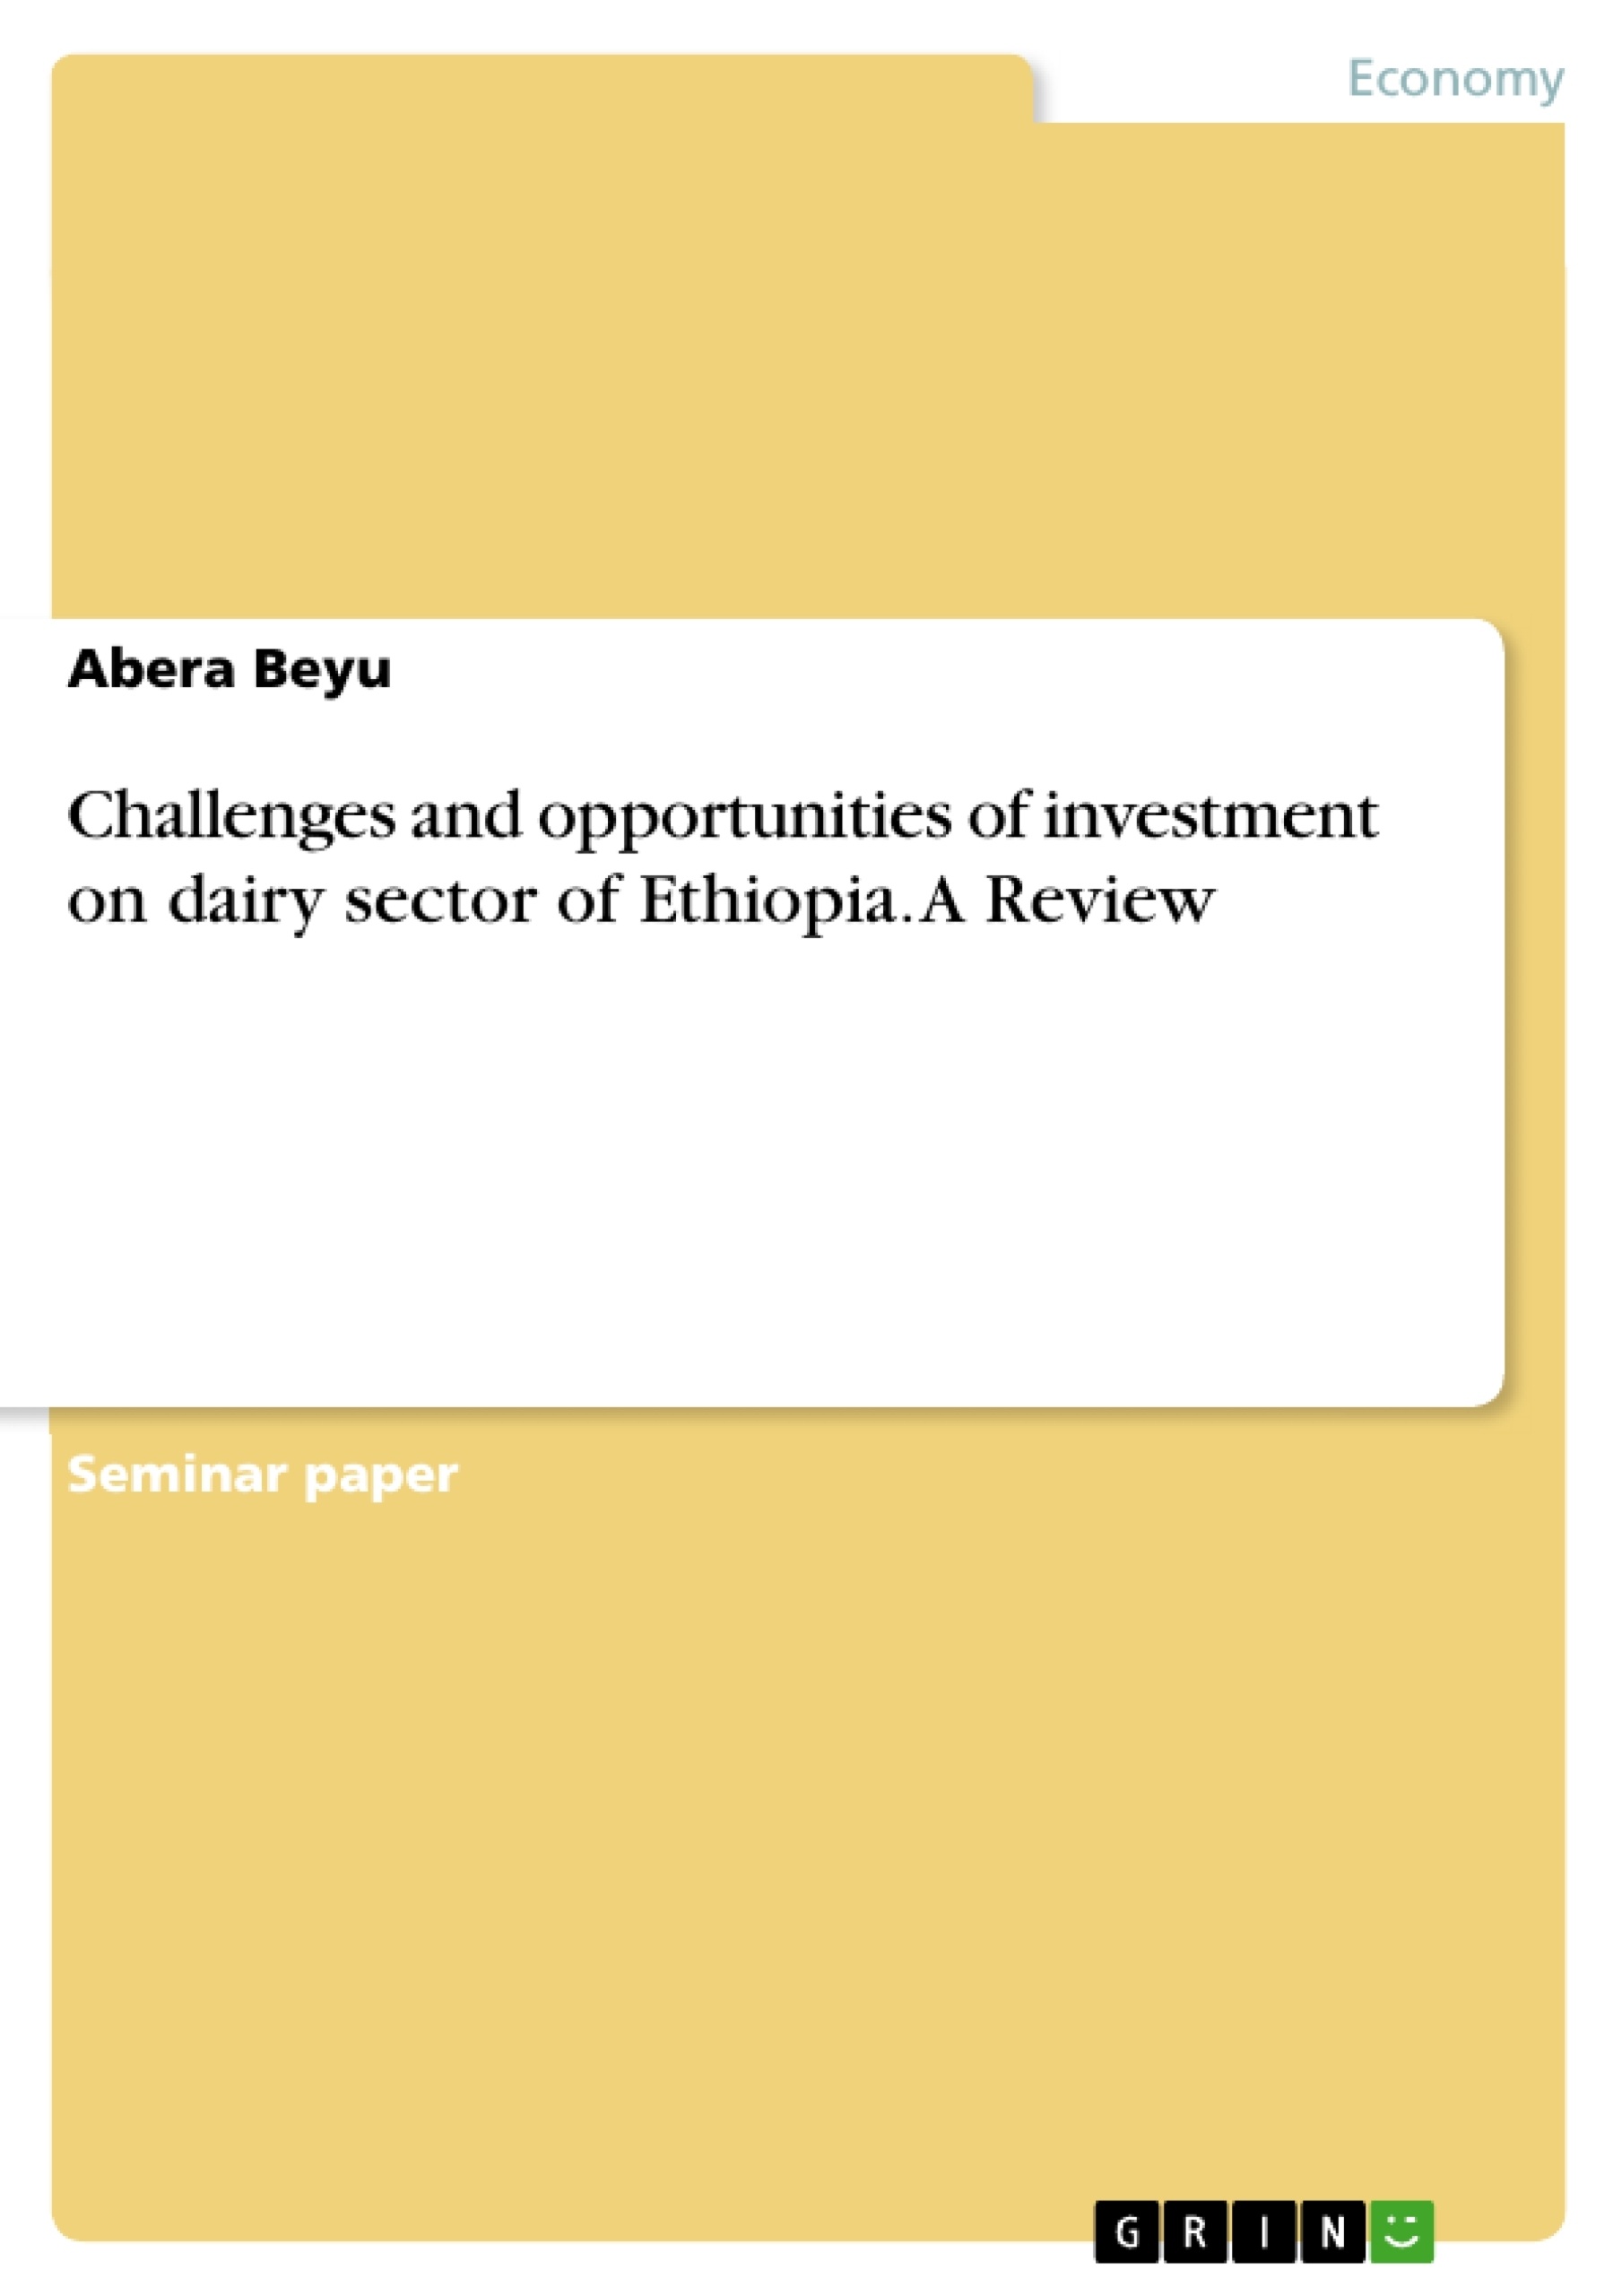 Title: Challenges and opportunities of investment on dairy sector of Ethiopia. A Review